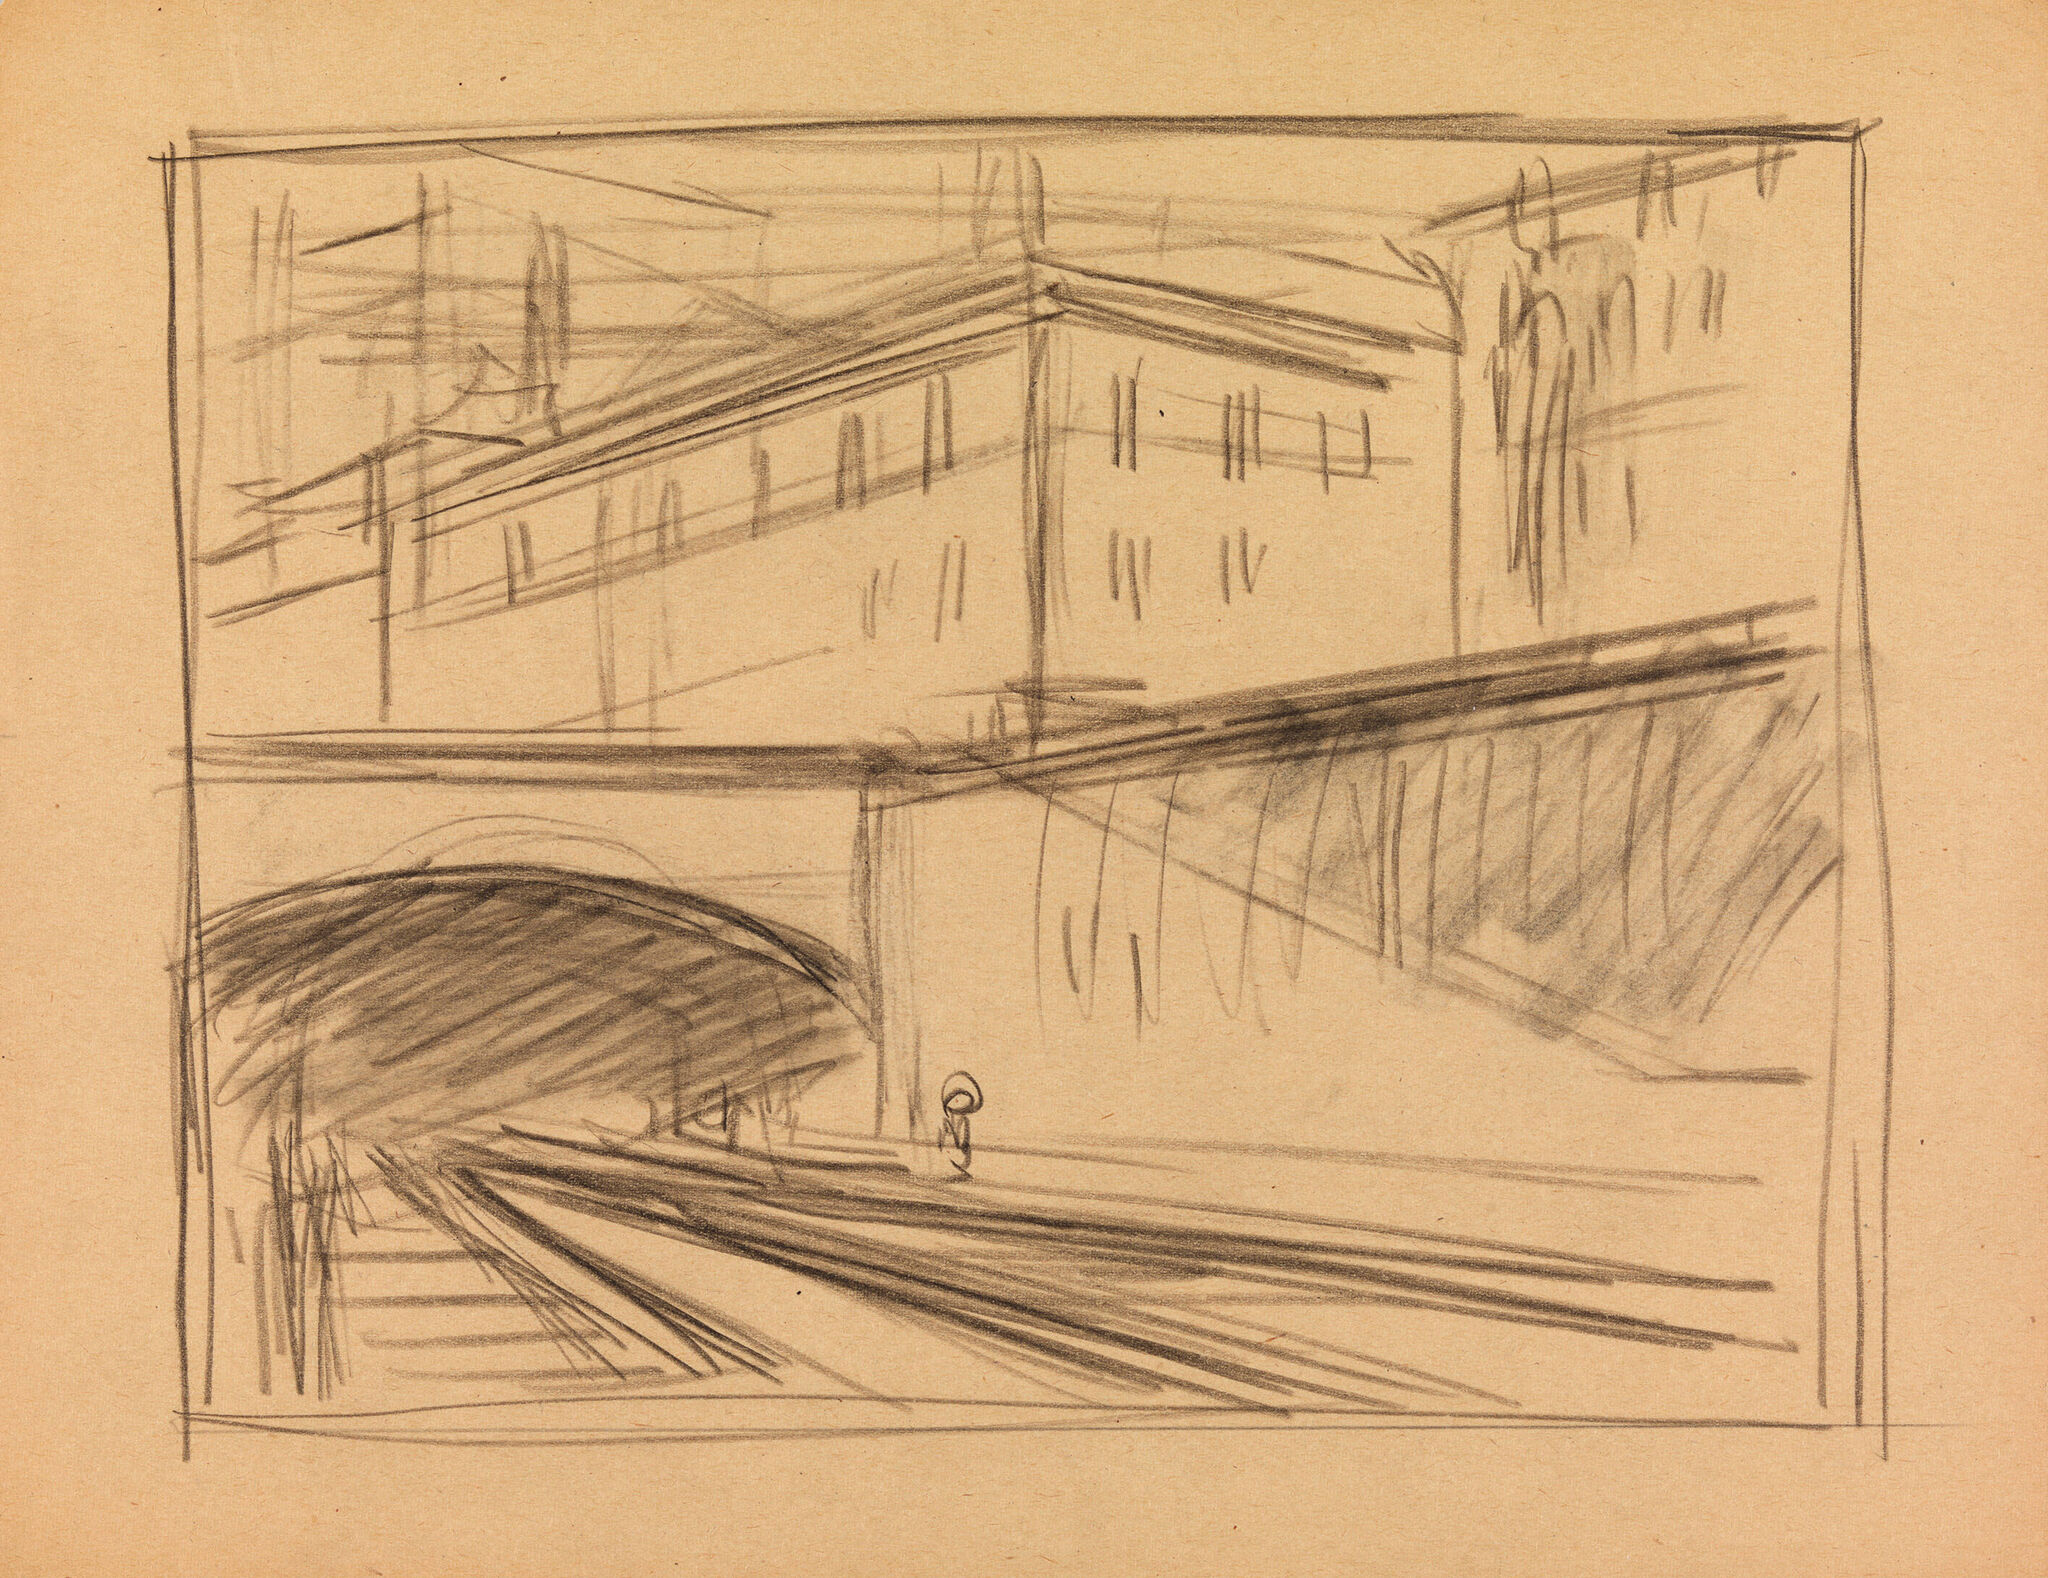 A sketch of a solitary entrance to an underground train track.